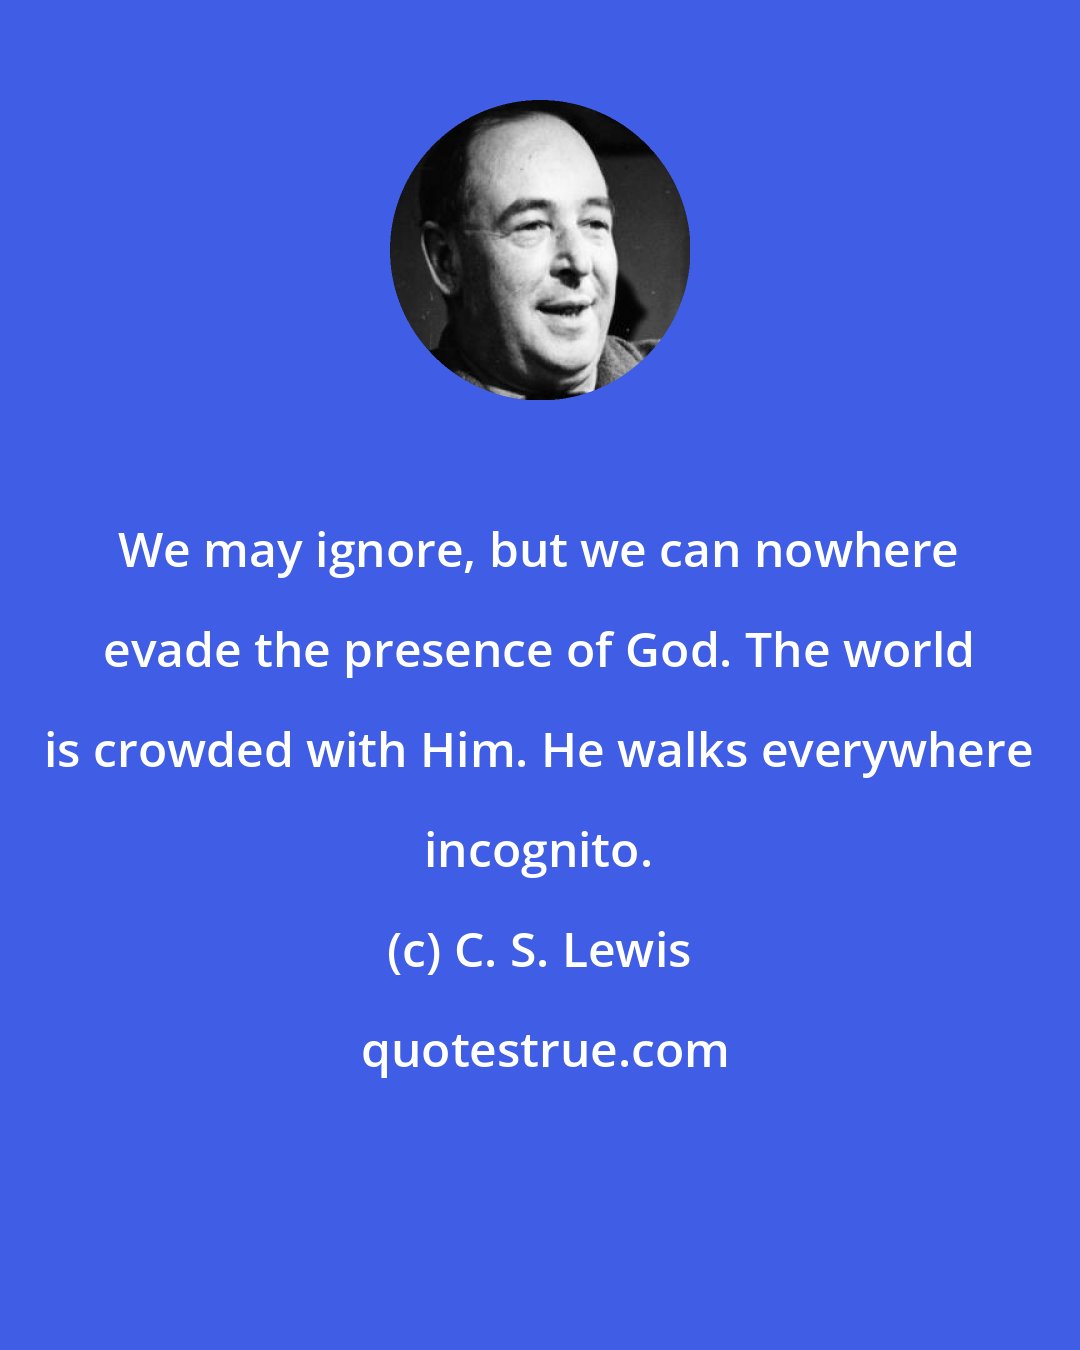 C. S. Lewis: We may ignore, but we can nowhere evade the presence of God. The world is crowded with Him. He walks everywhere incognito.